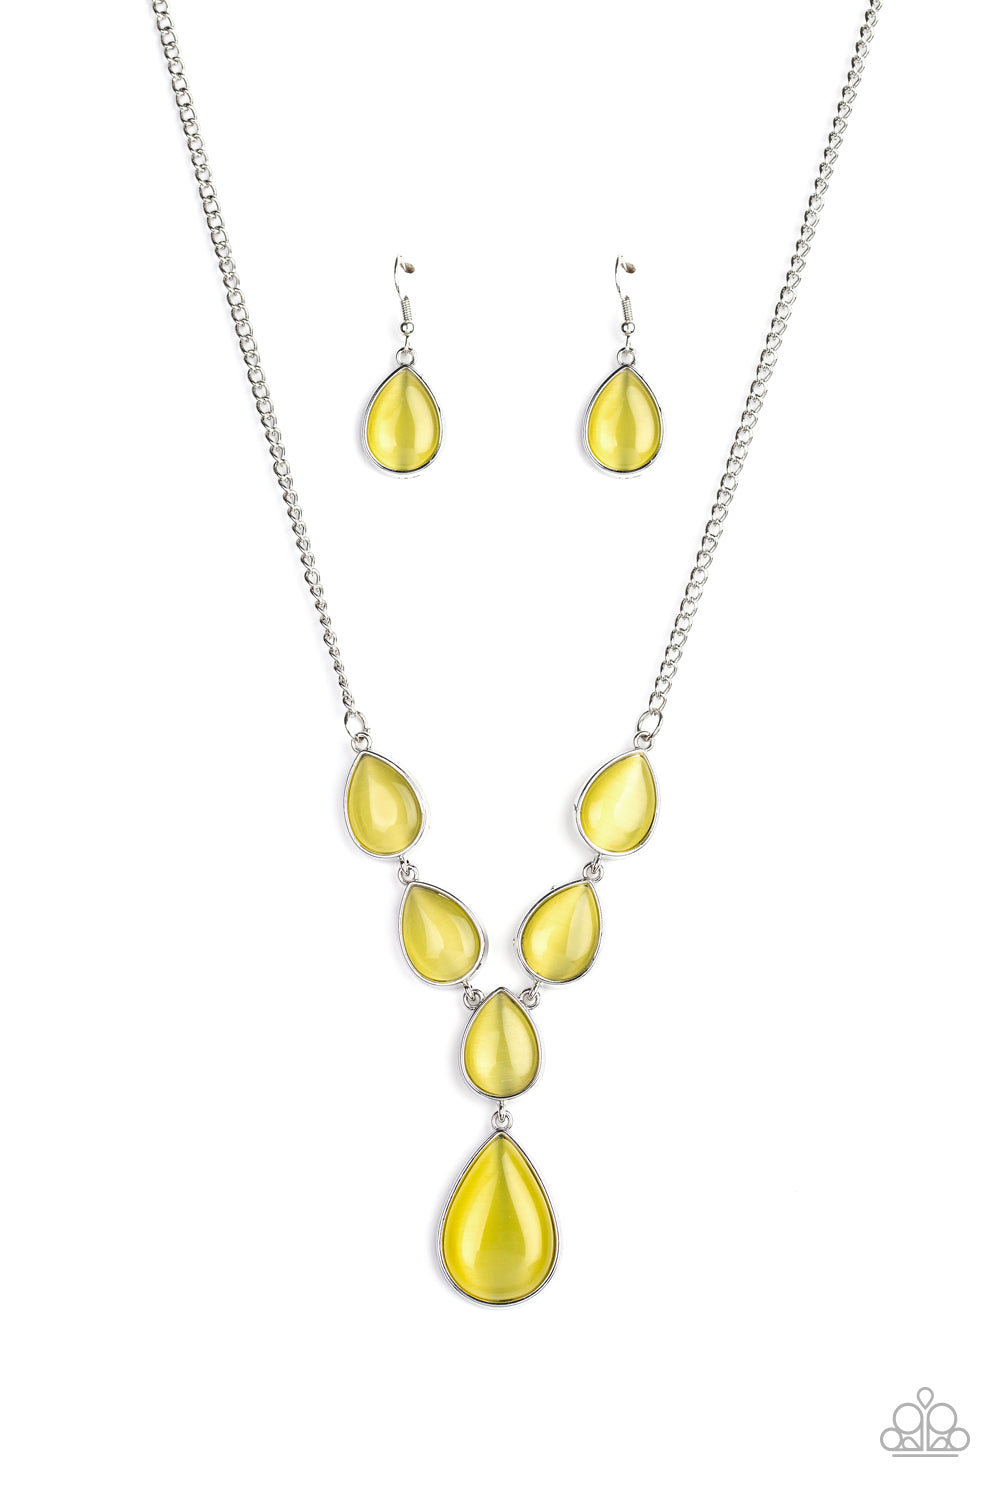 Paparazzi Dewy Decadence - Yellow Necklace - A Finishing Touch 